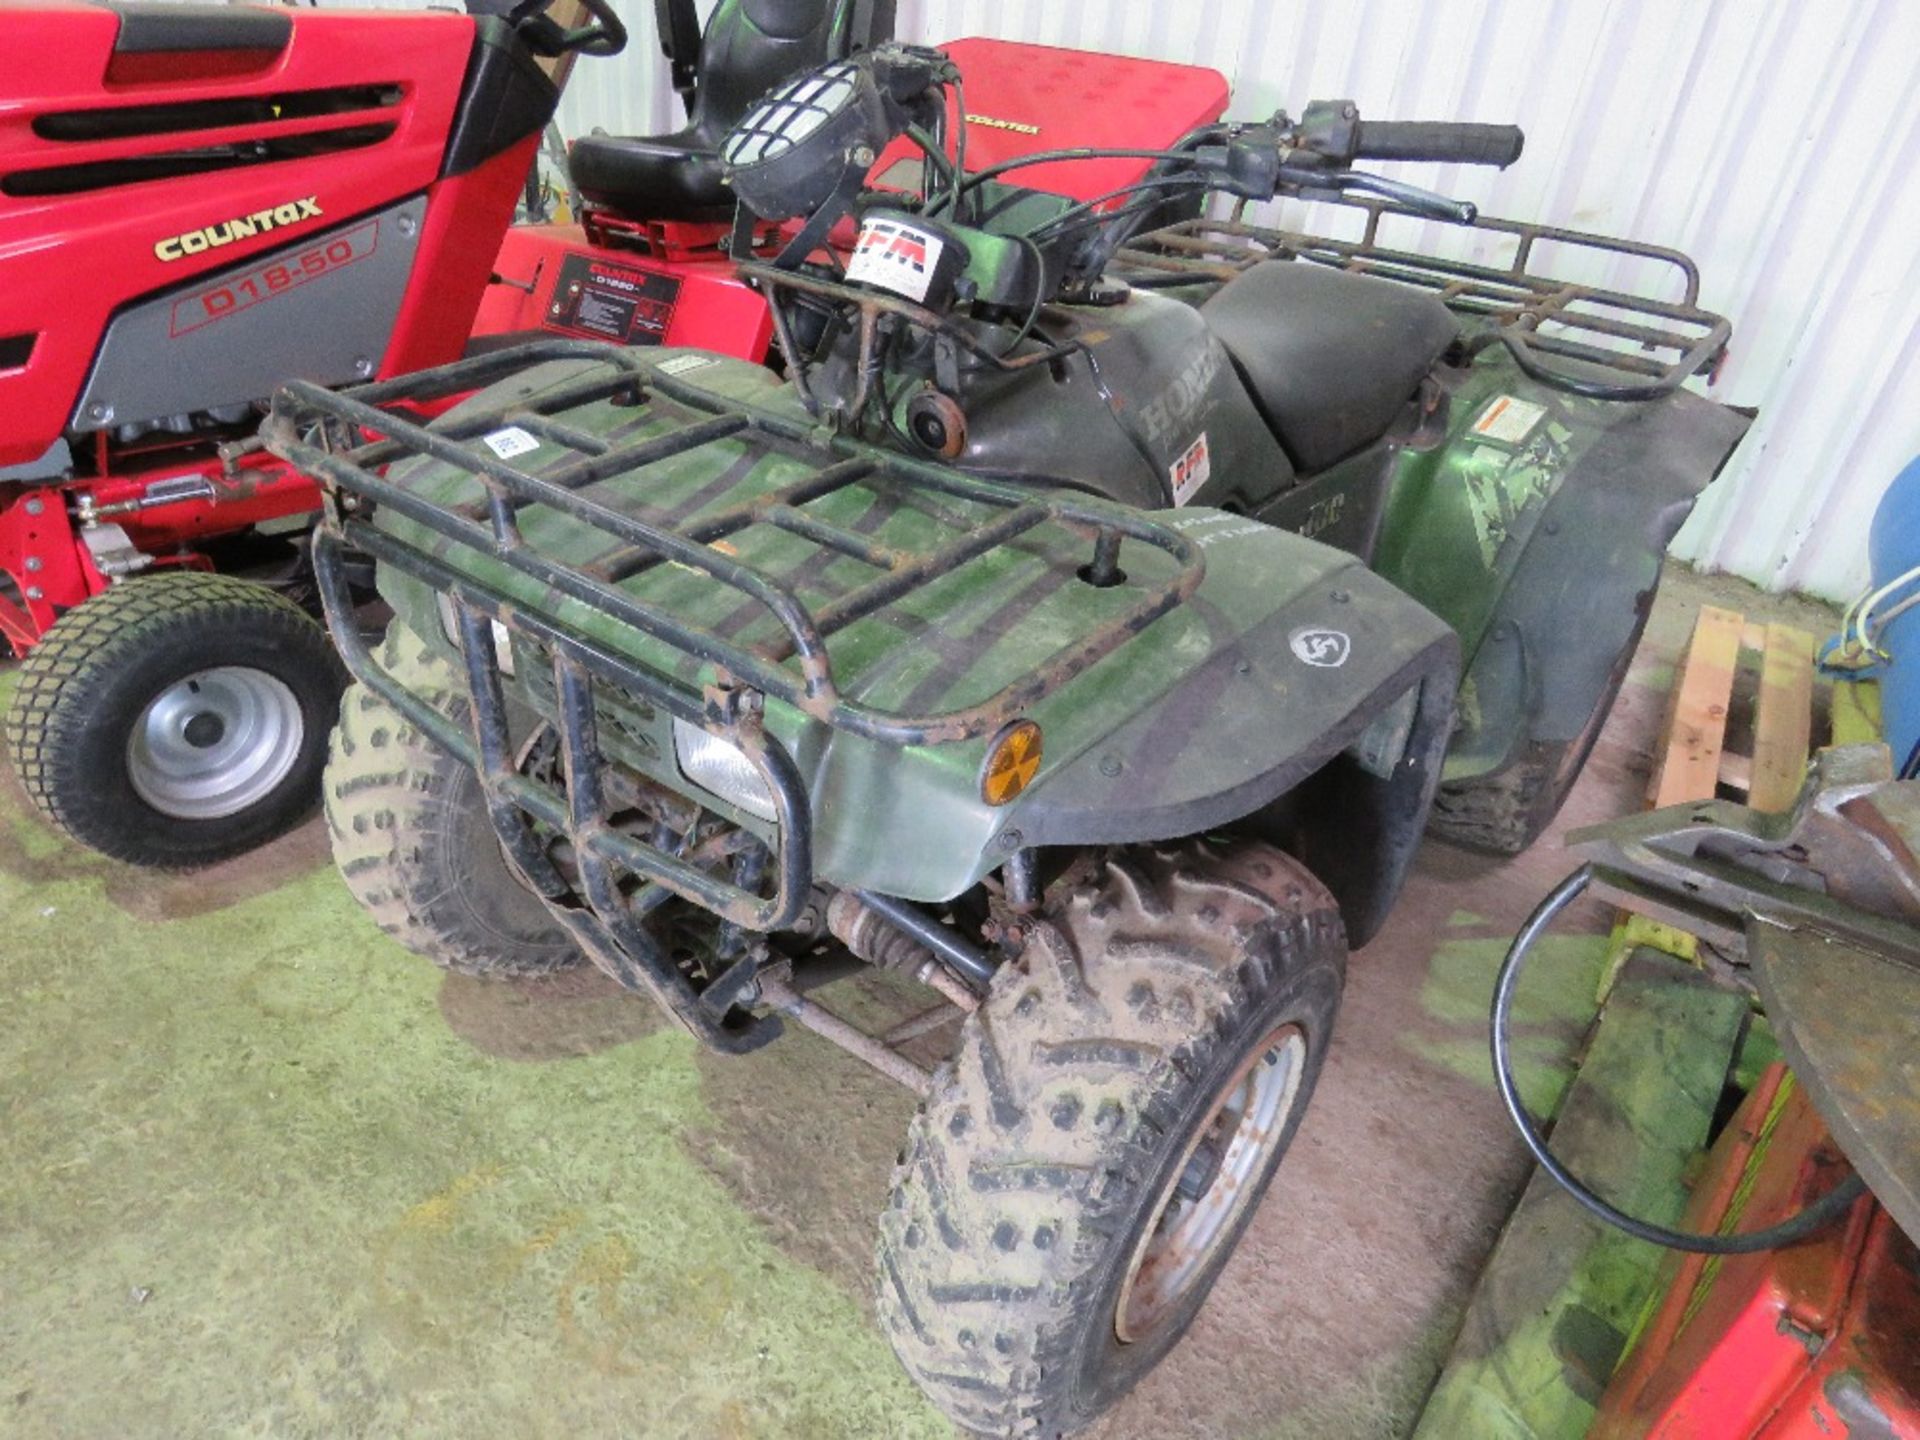 HONDA FOURTRAX 300 PETROL QUAD BIKE, 4WD. WHEN TESTED WAS SEEN TO TURN OVER BUT NOT STARTING...PRES - Image 2 of 10